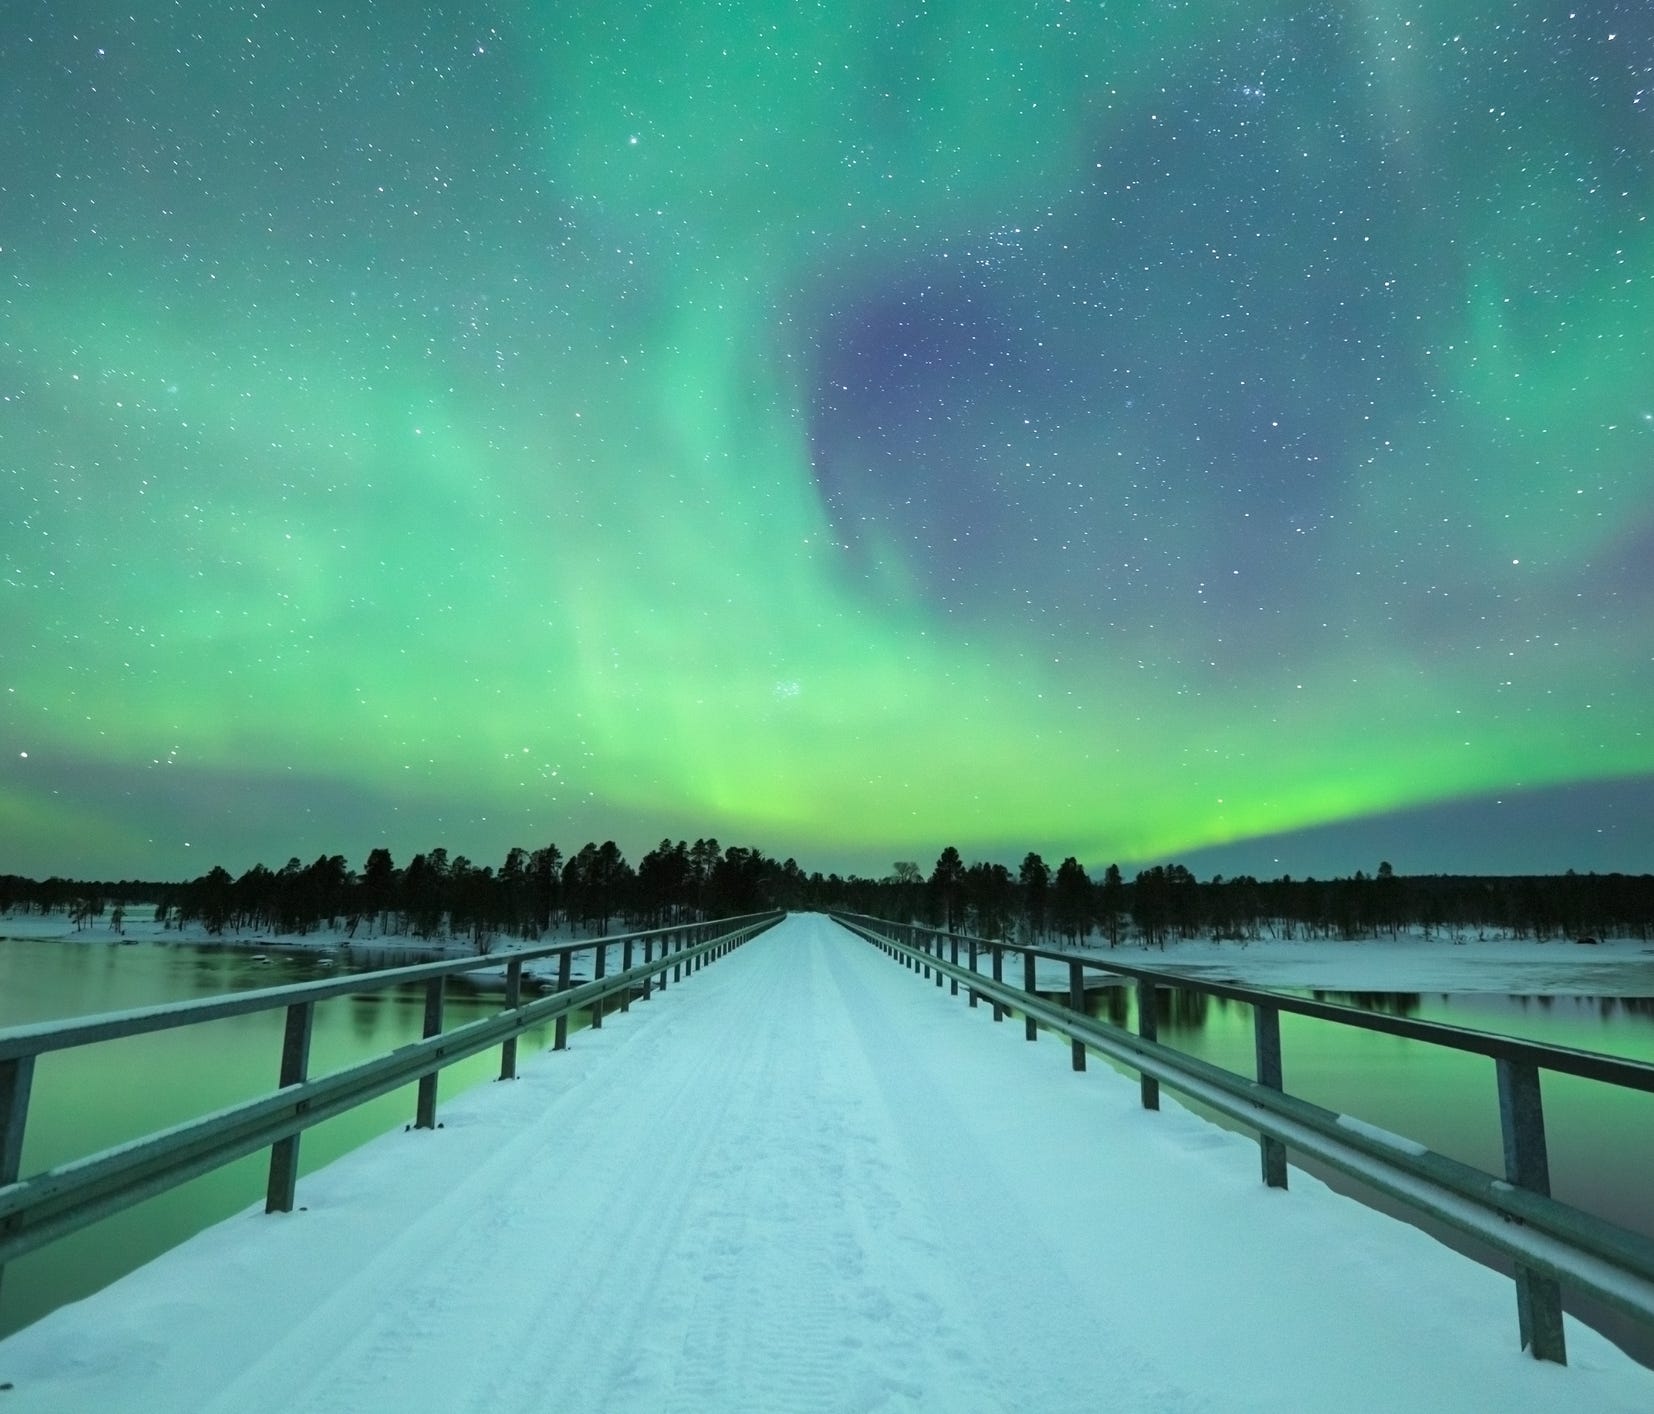 Lapland Region, Finland: Way up in the northern Lapland region of Finland, the municipality of Muonio topped WHO's most recent clean air list. While you pull in the fresh air, you can take in some superb views of the northern lights; Finns often ski 